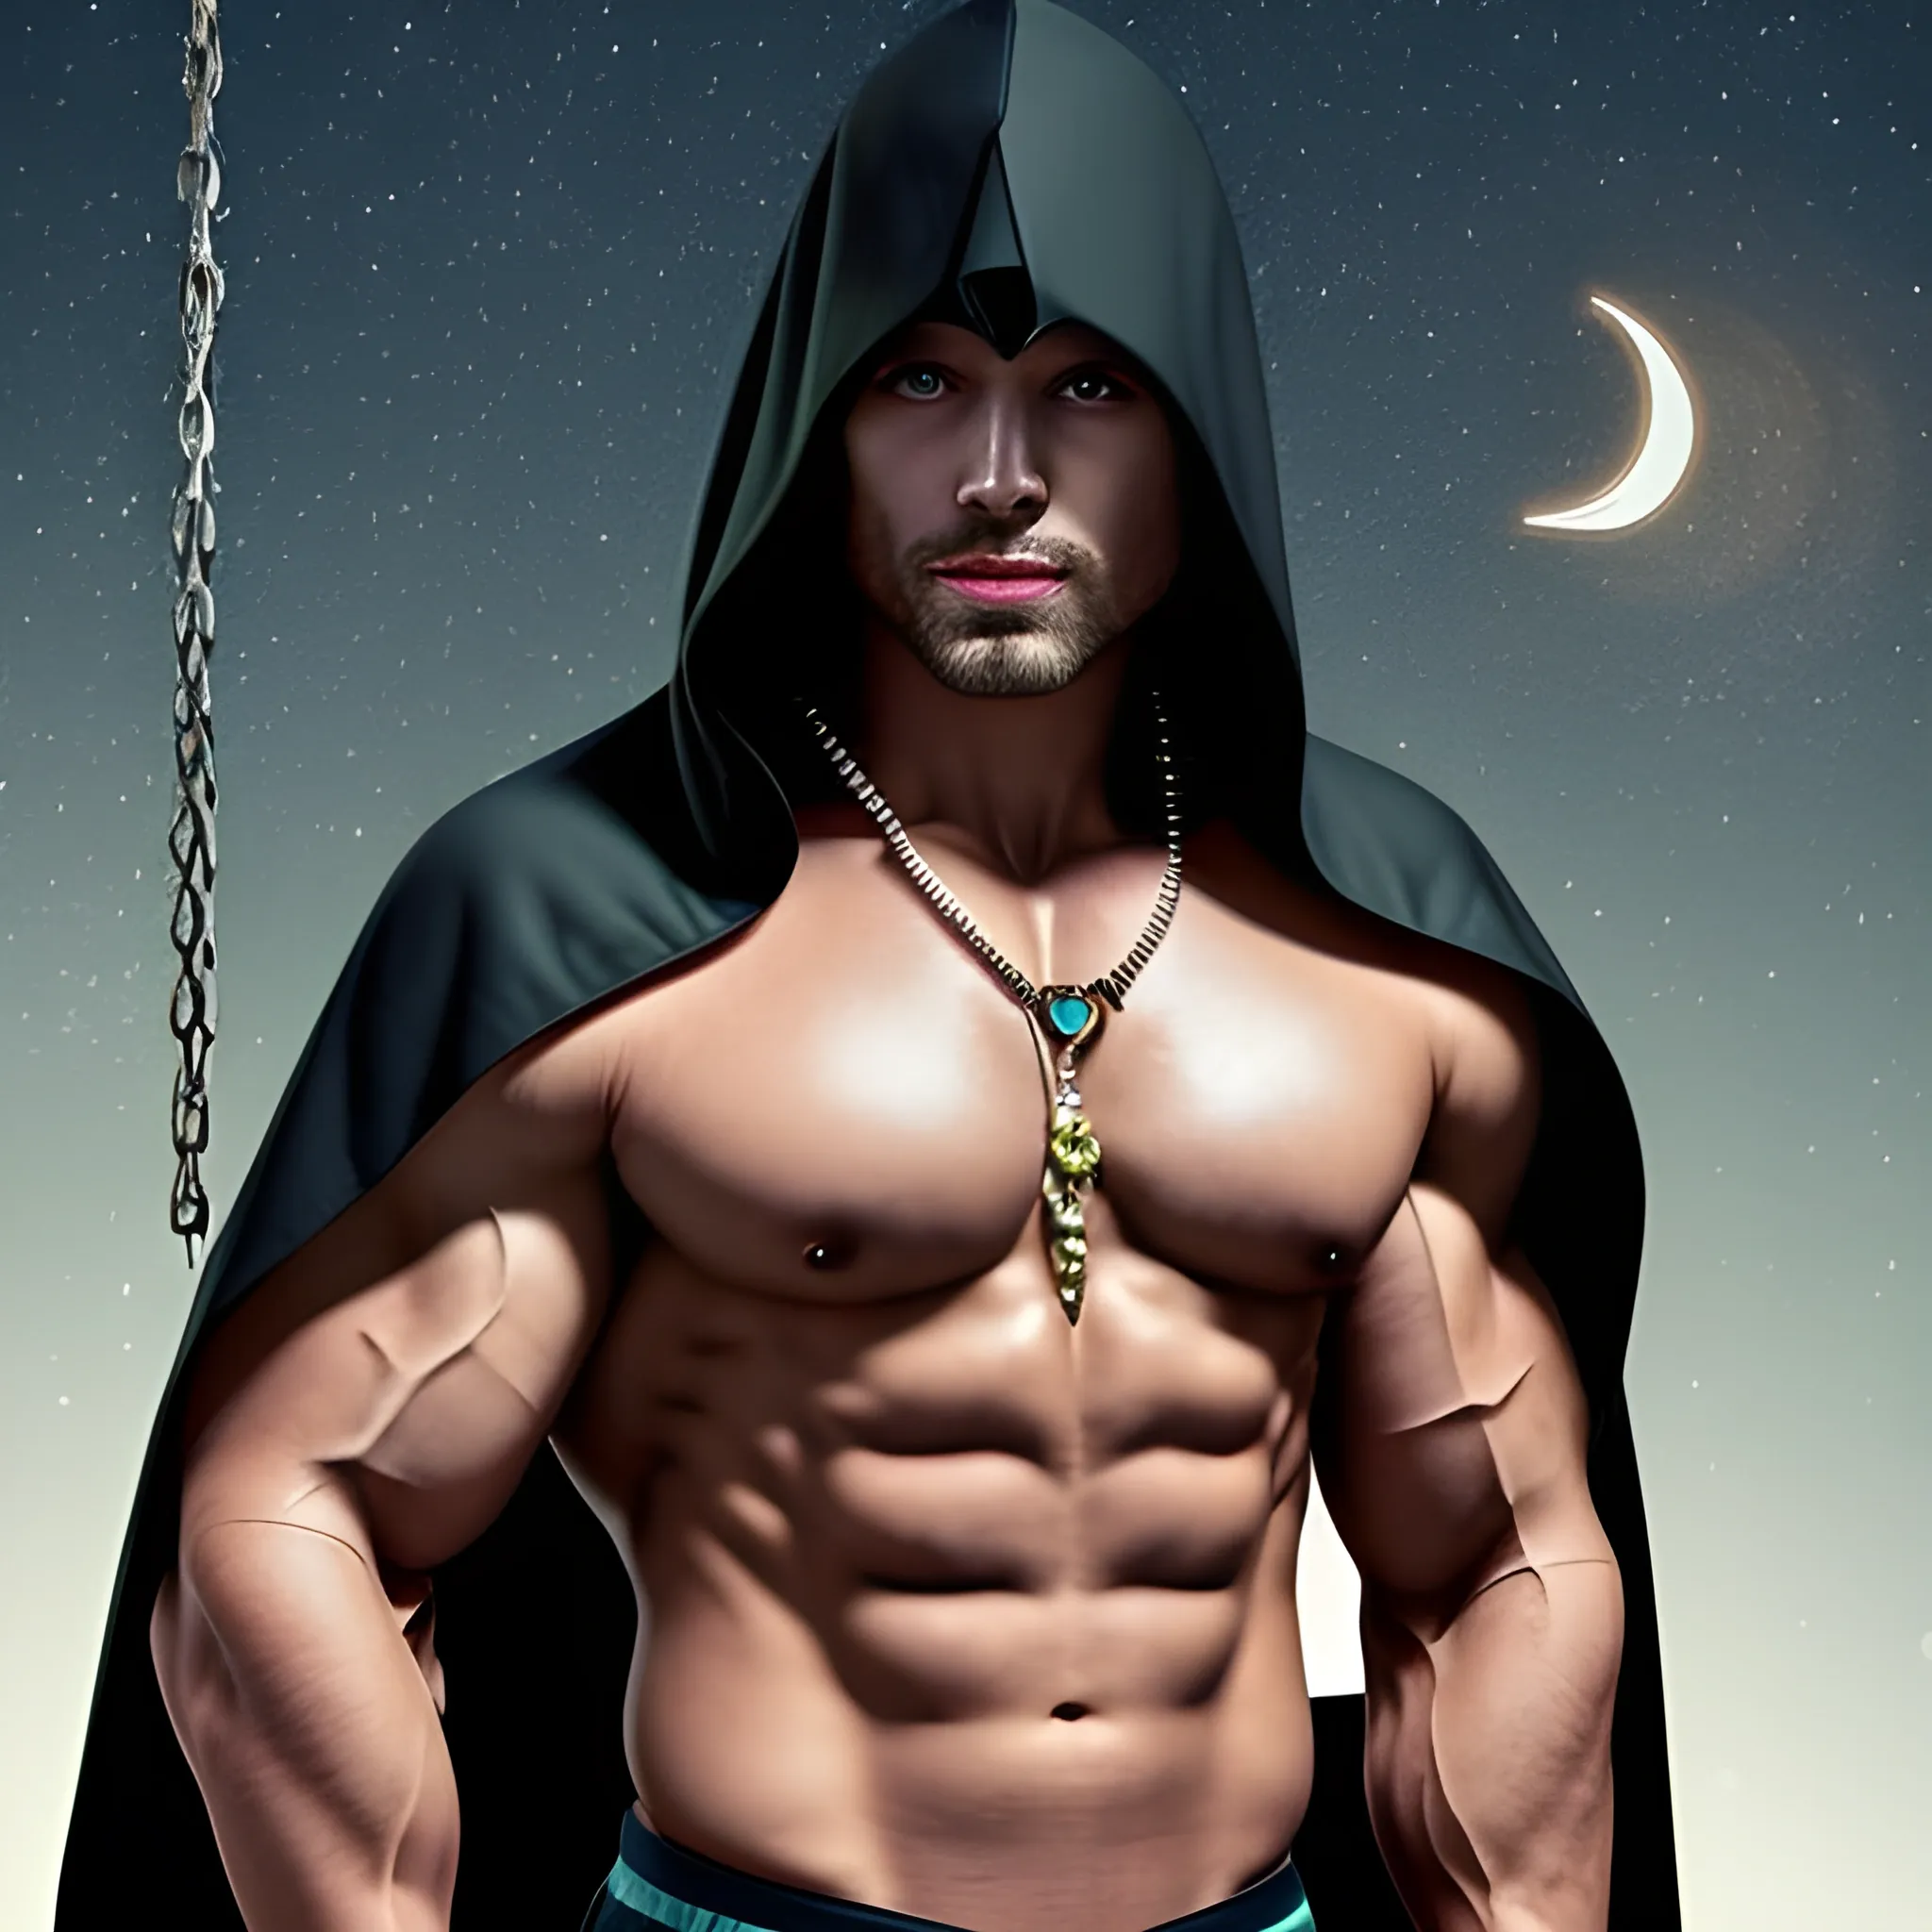 Somewhat muscular man wearing a hood with a necklace resembling that of a crescent moon